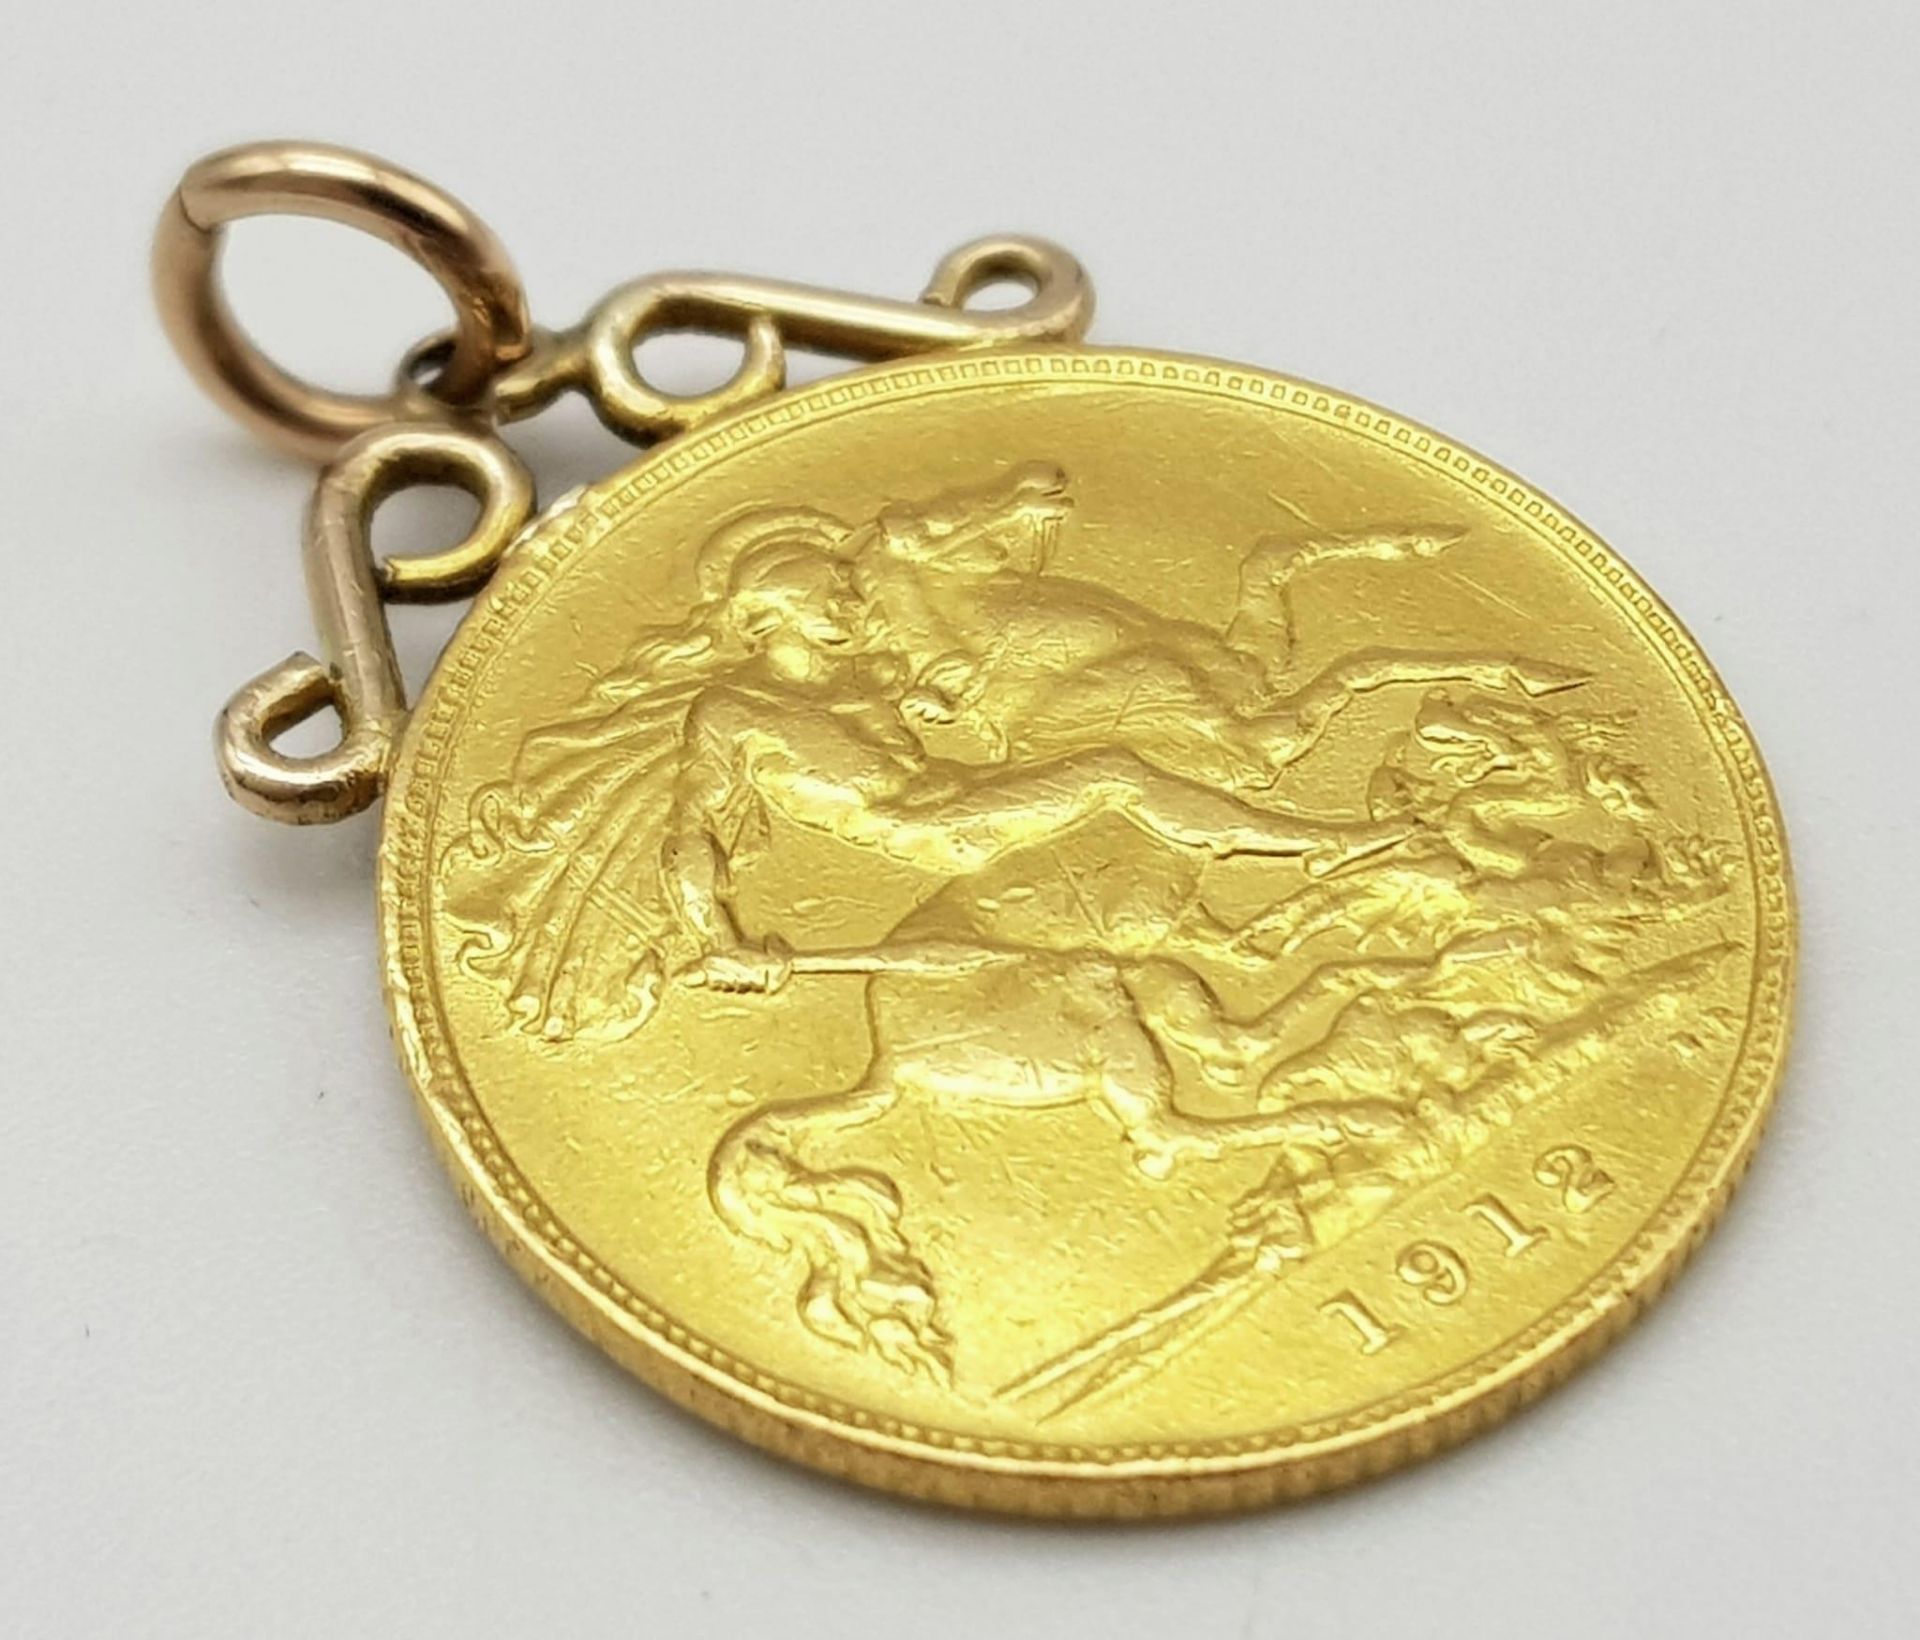 A 1912 King George V half sovereign pendant, total weight: 4.4 g